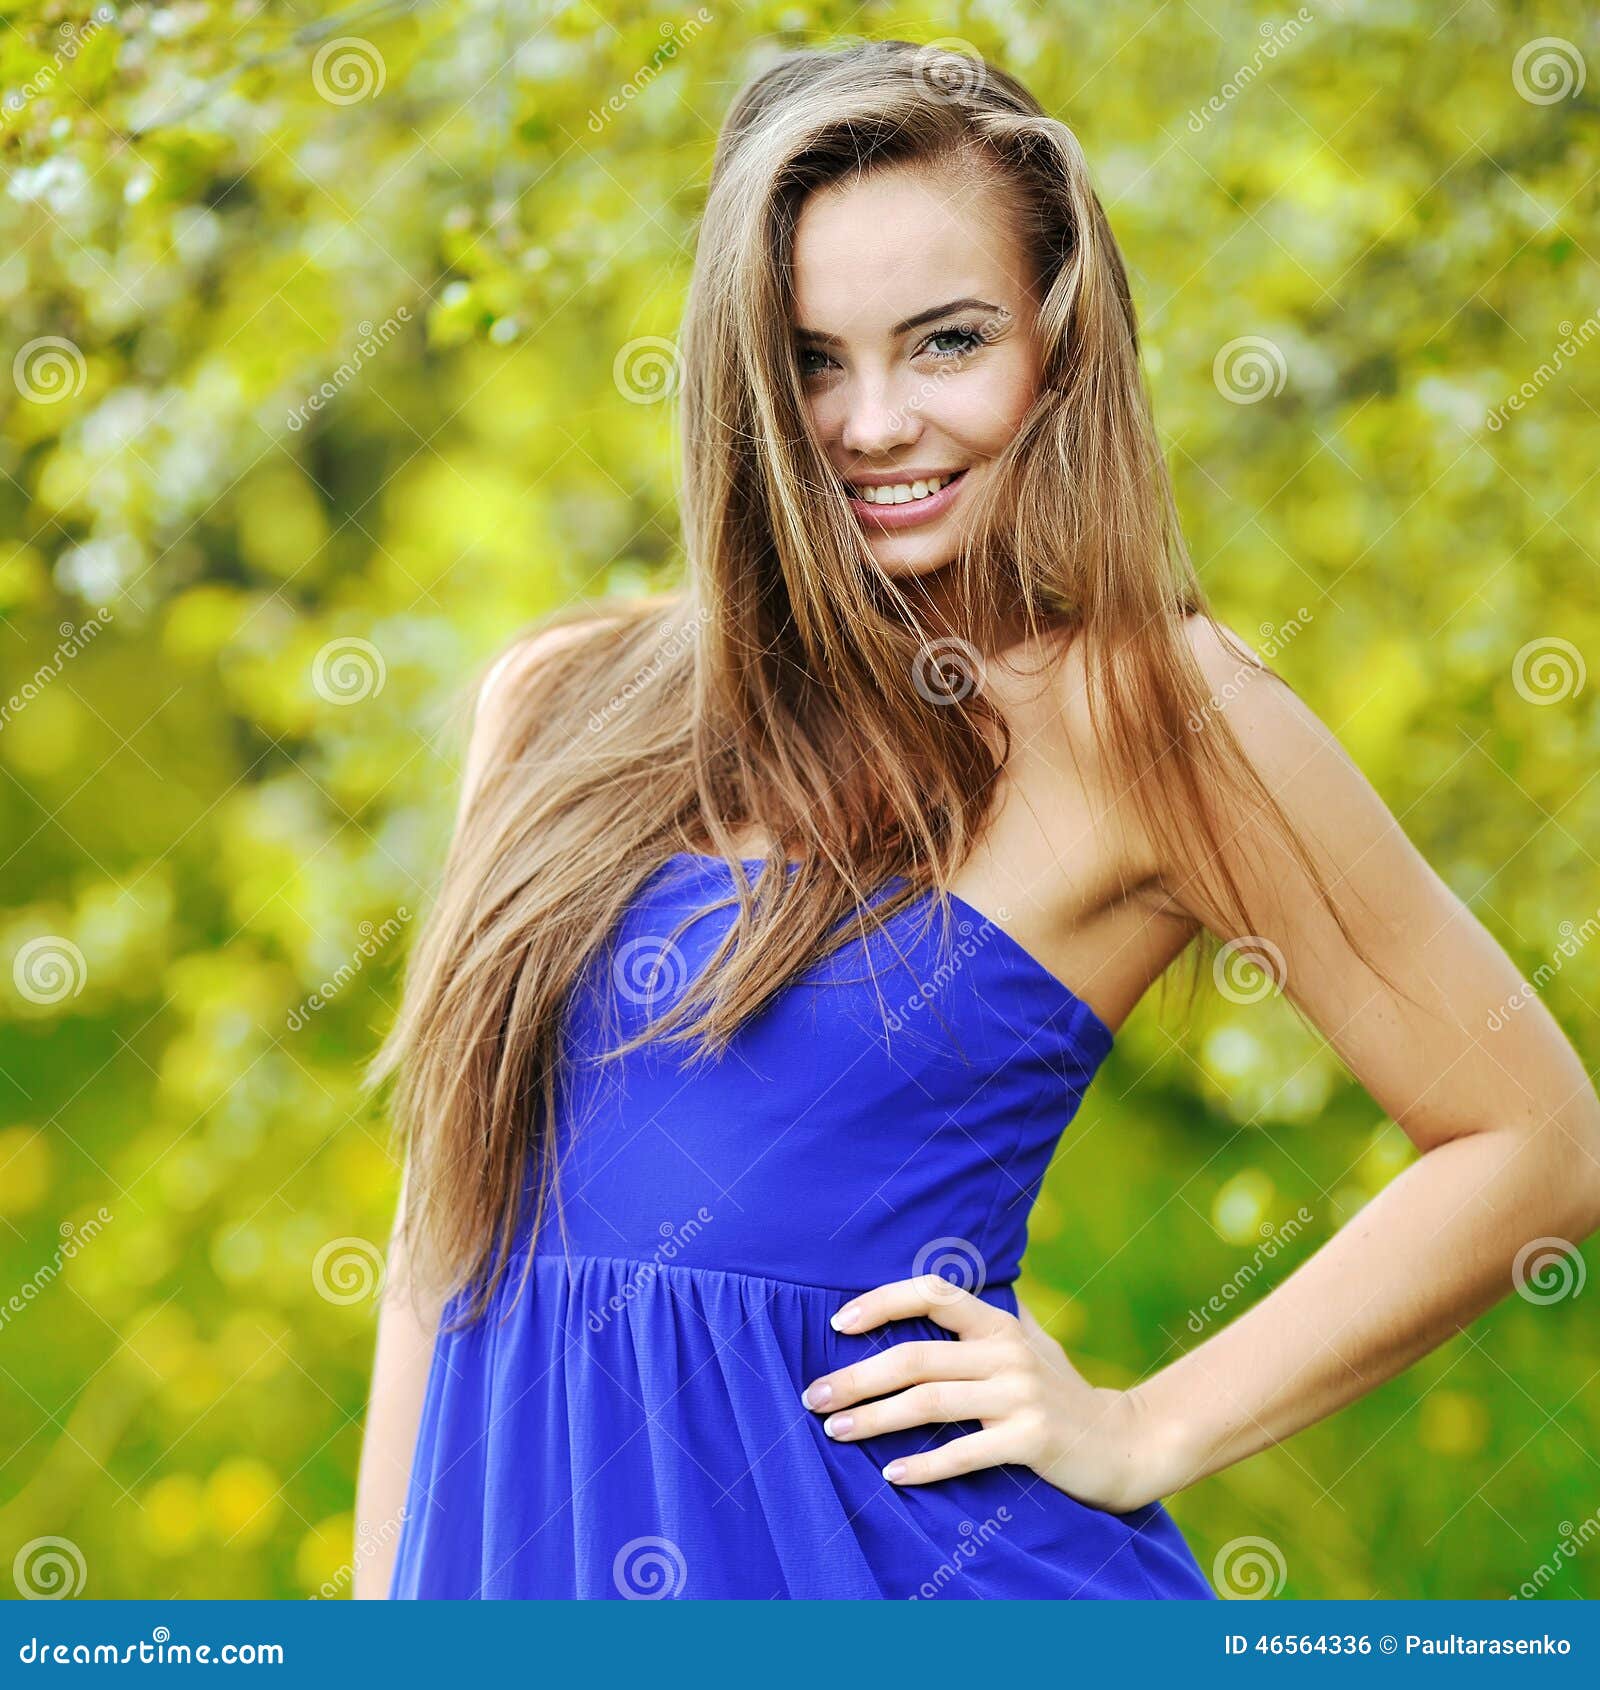 Portrait of the Young Beautiful Smiling Woman Outdoors Stock Photo ...